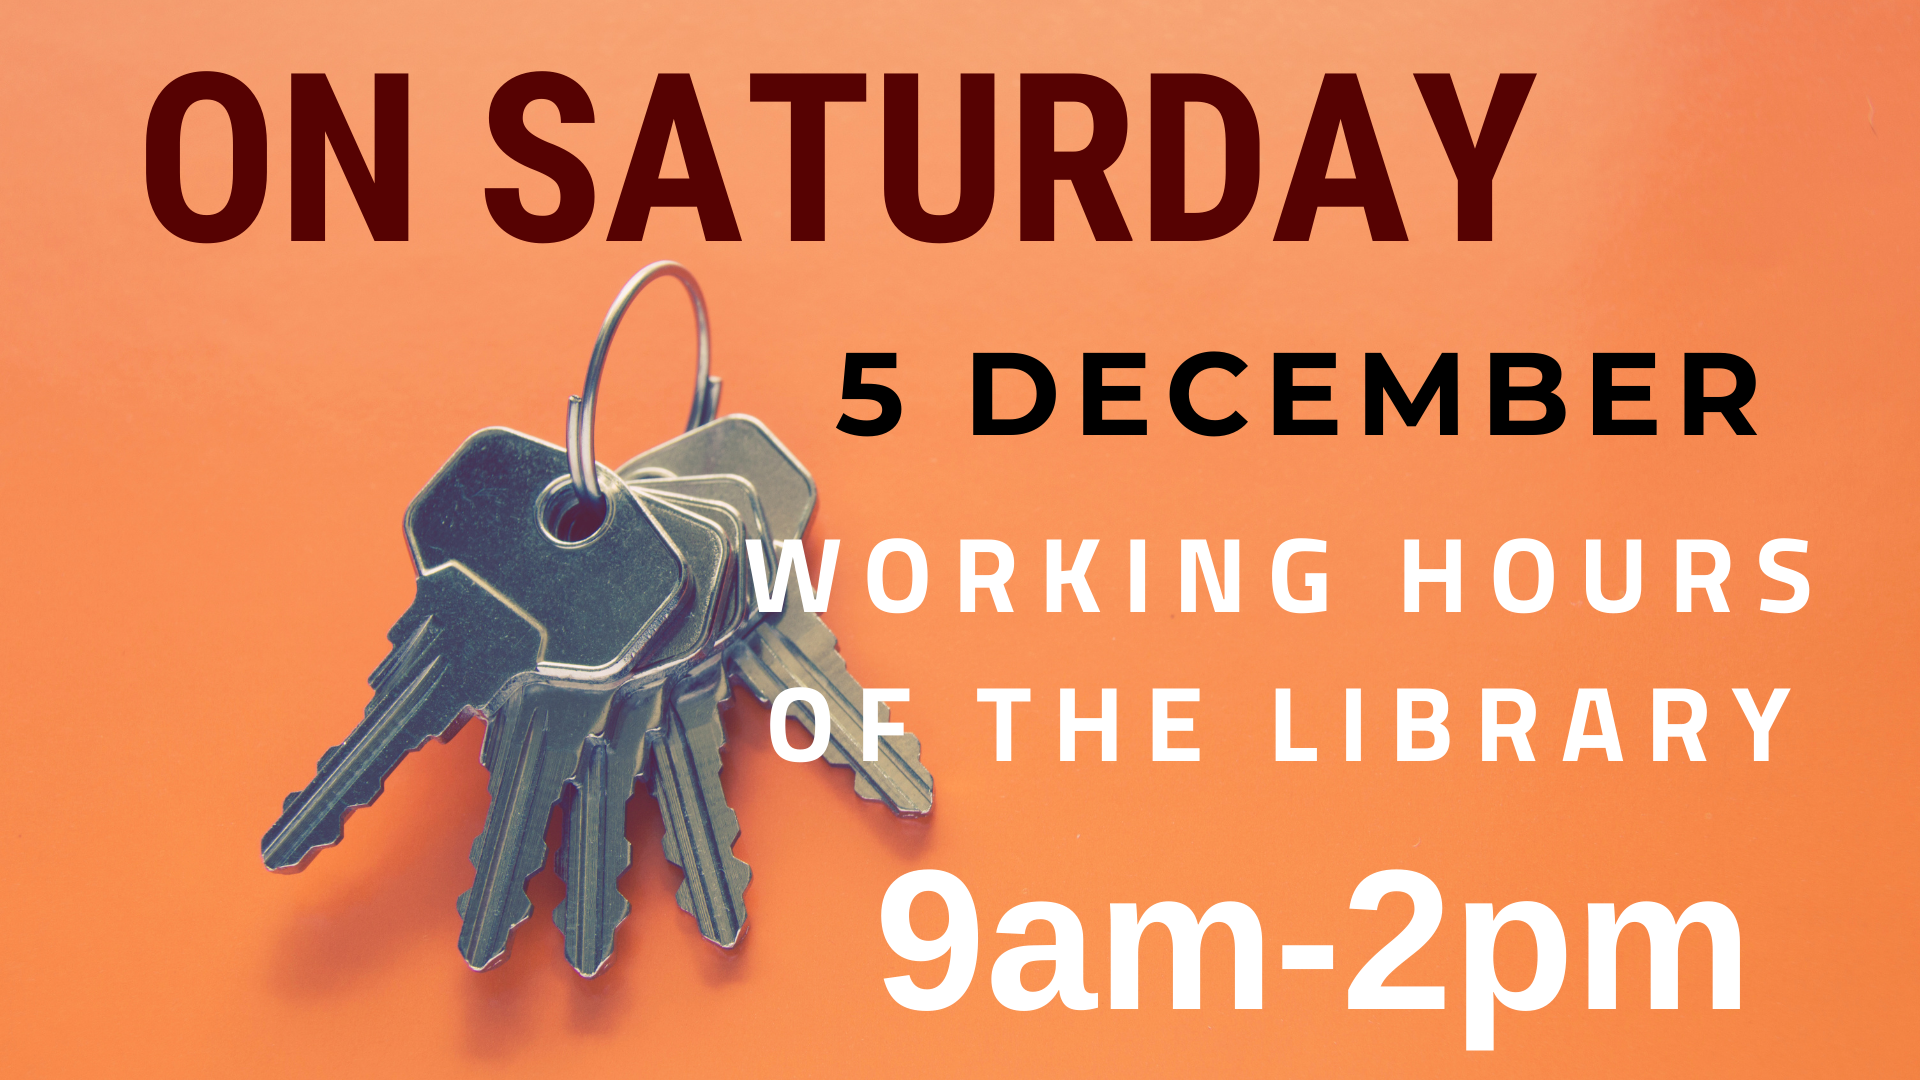 On Saturday 5 December our library is open from 9am until 2pm